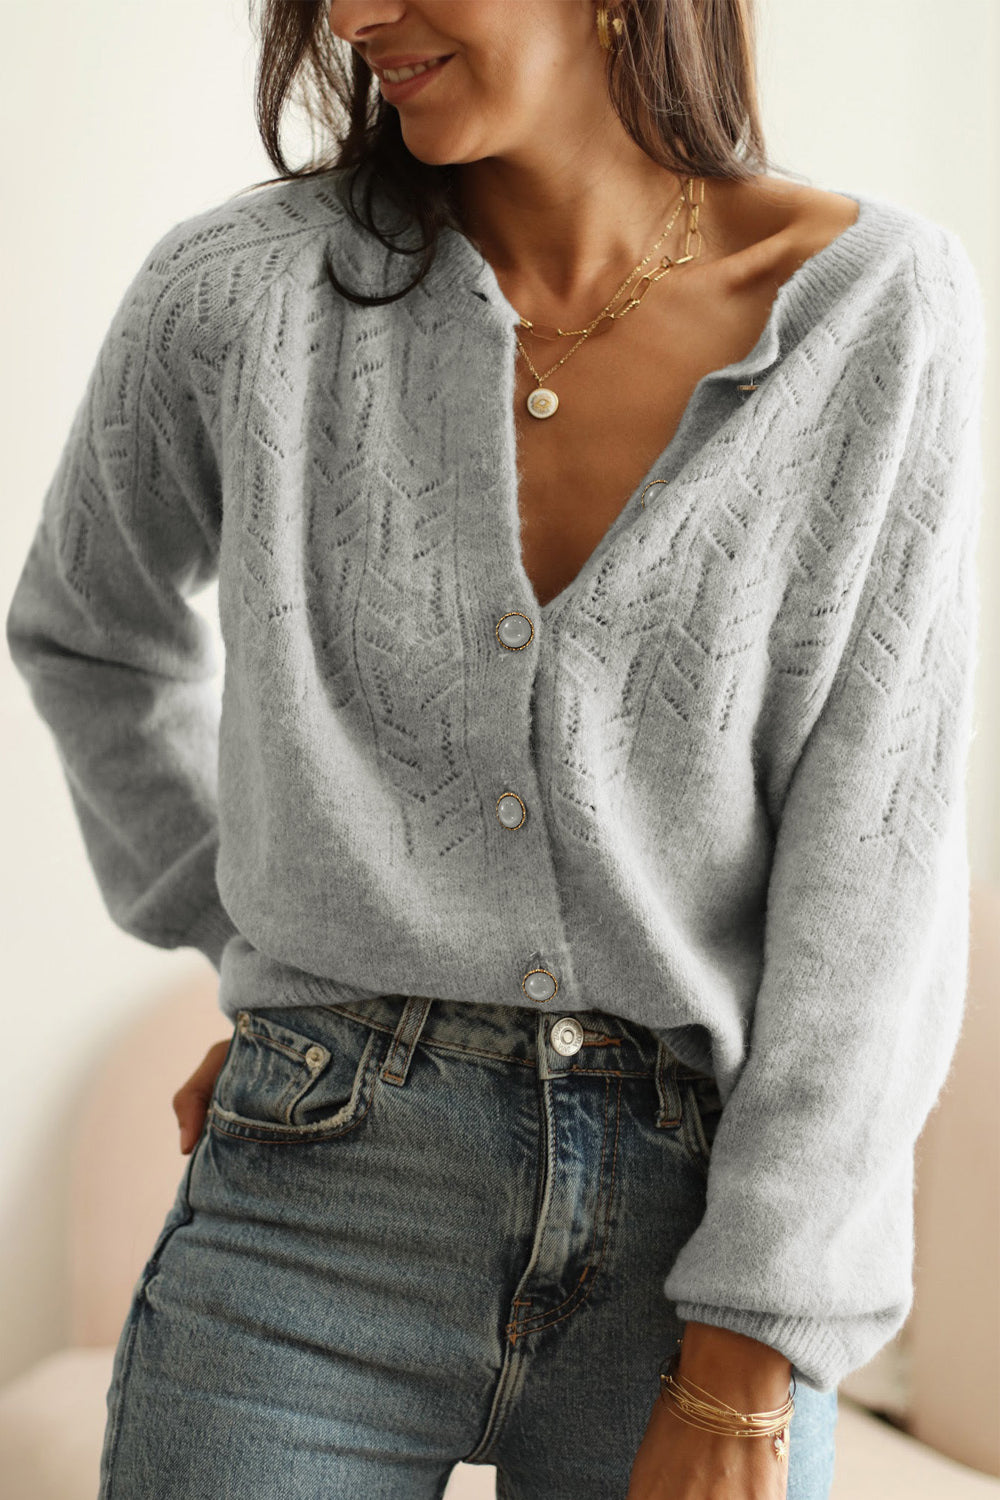 Long Sleeve Button Down Cardigan - Gray / S - Women’s Clothing & Accessories - Shirts & Tops - 1 - 2024